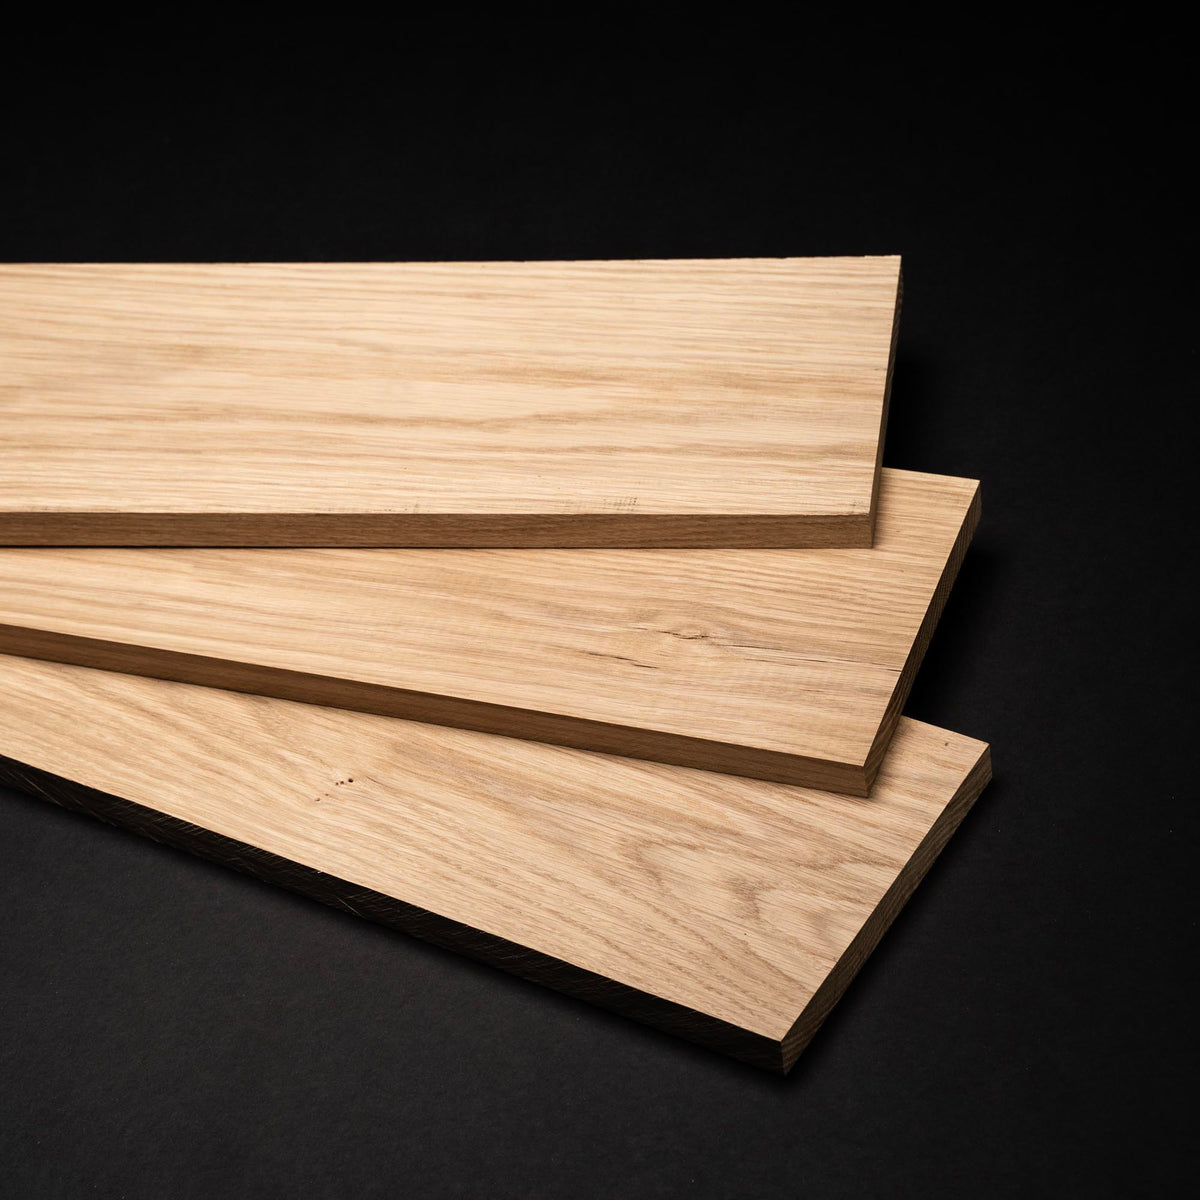 4/4 1&quot; WHITE OAK Lumber Pack, S3S Clear/Select Boards - Kiln Dried - Packs of 10, 50, 100 Board Feet